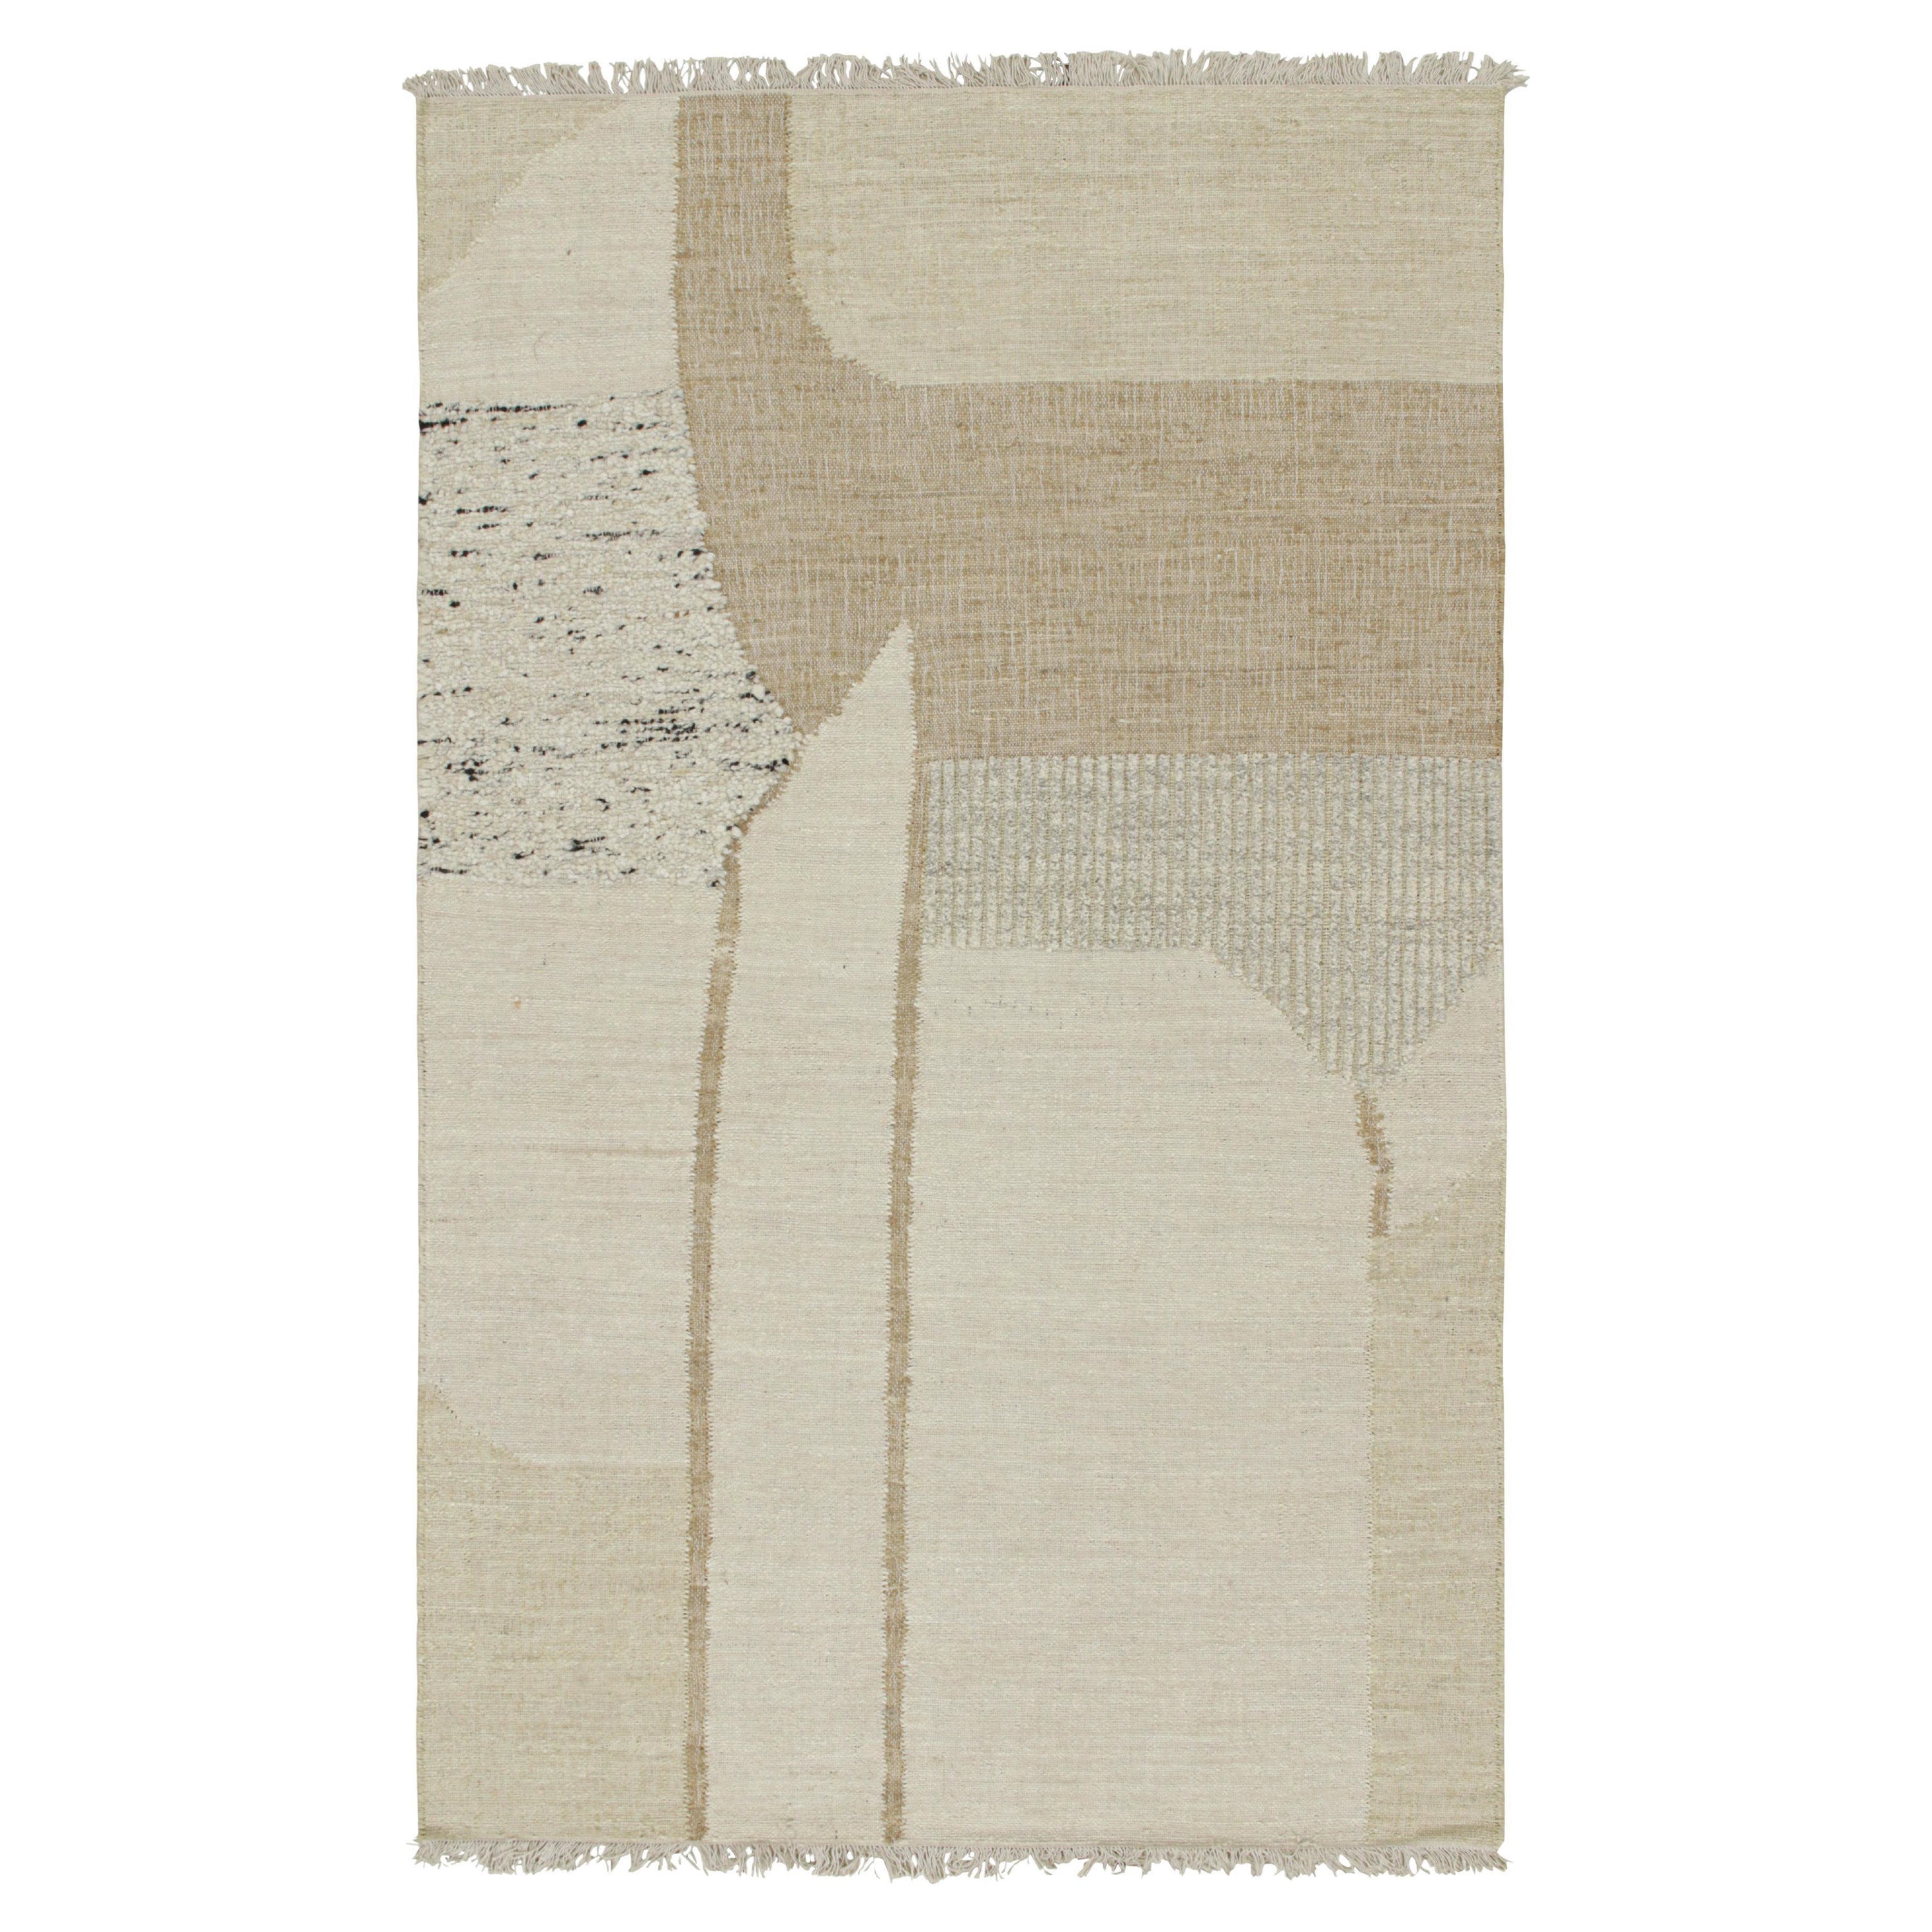 Reug & Kilim’s Contemporary kilim rug in Brown, White & Black Abstract Pattern